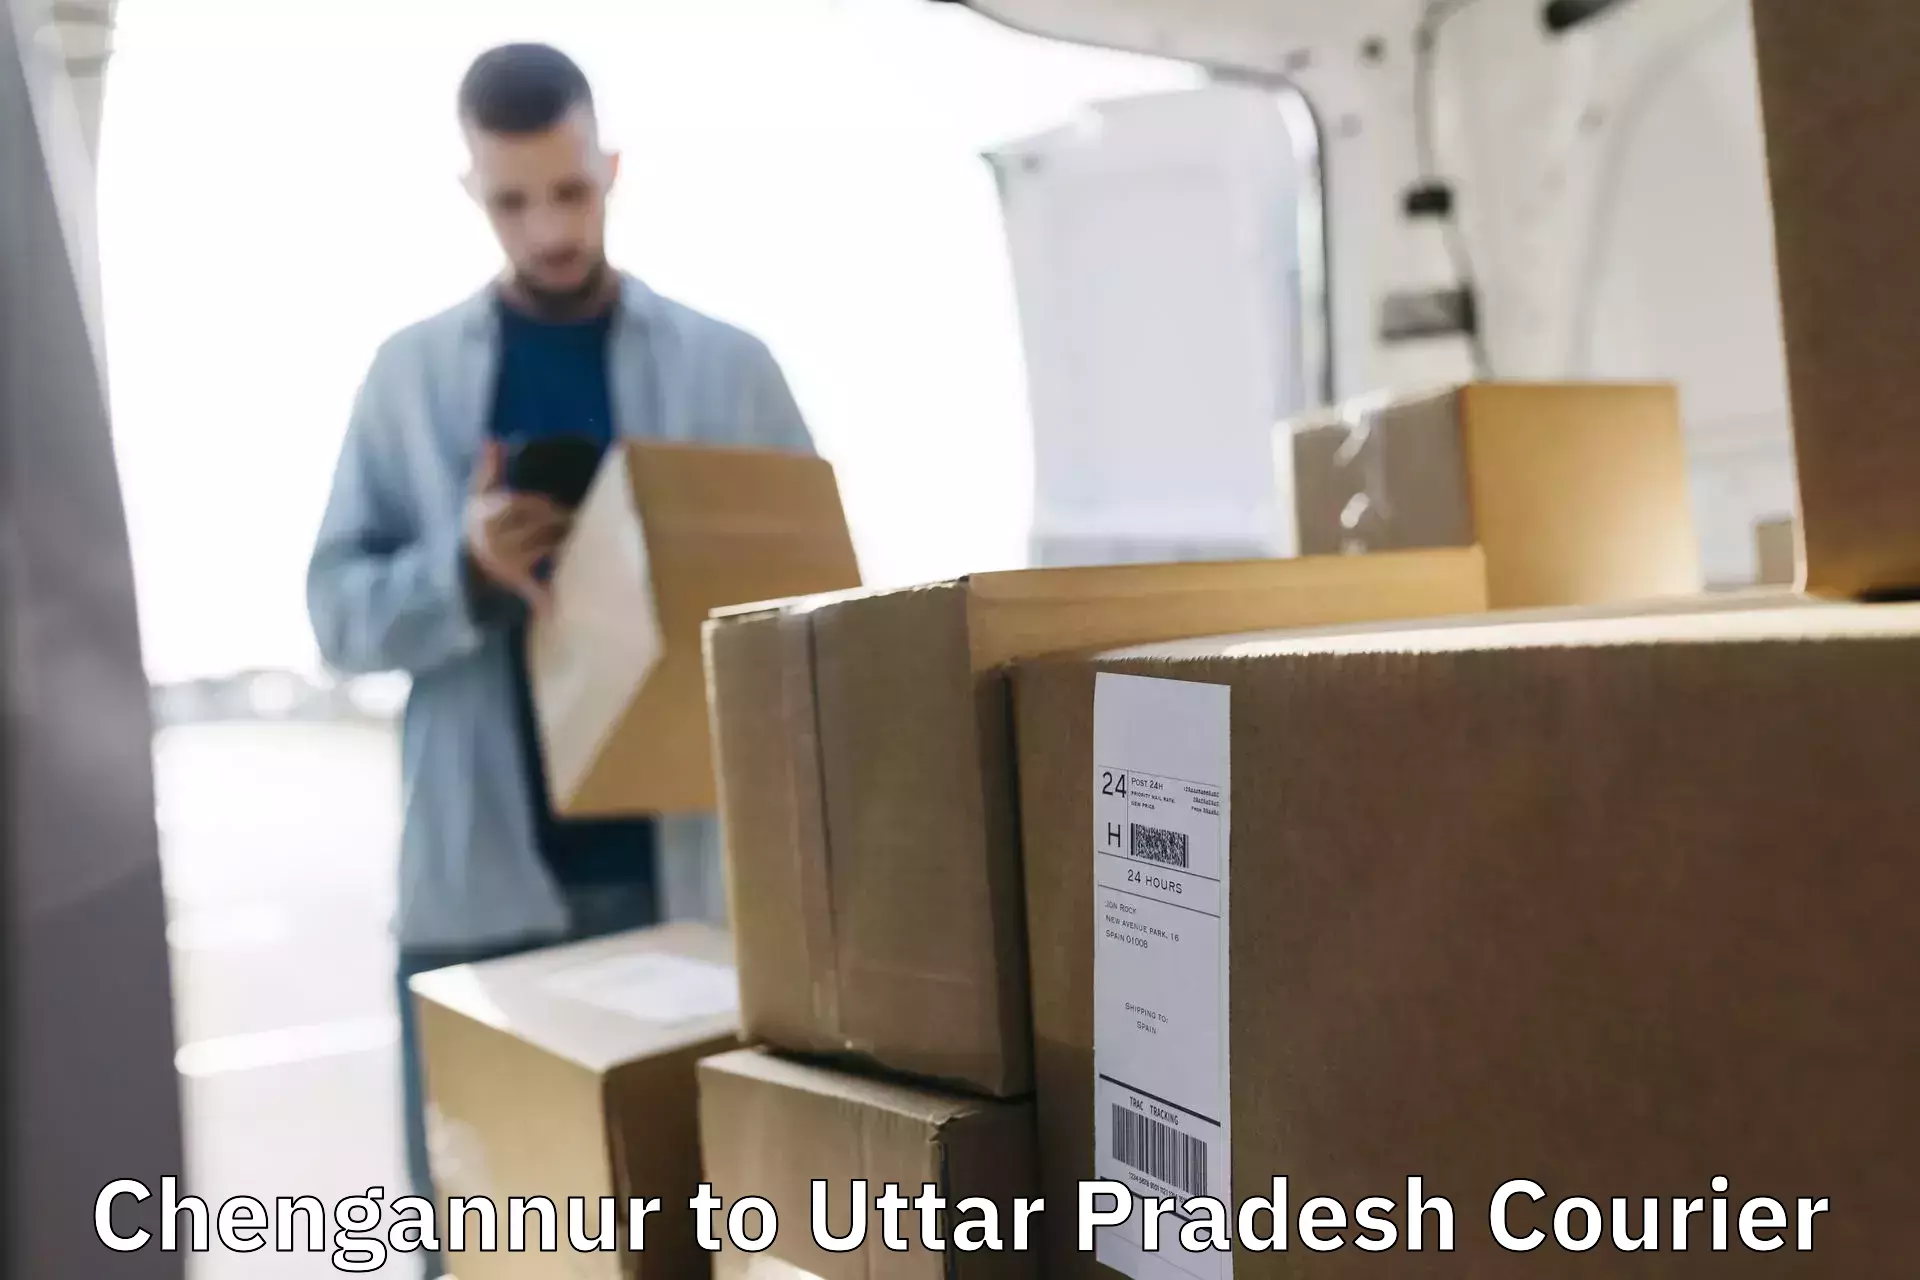 Courier service efficiency Chengannur to Jagdishpur Amethi